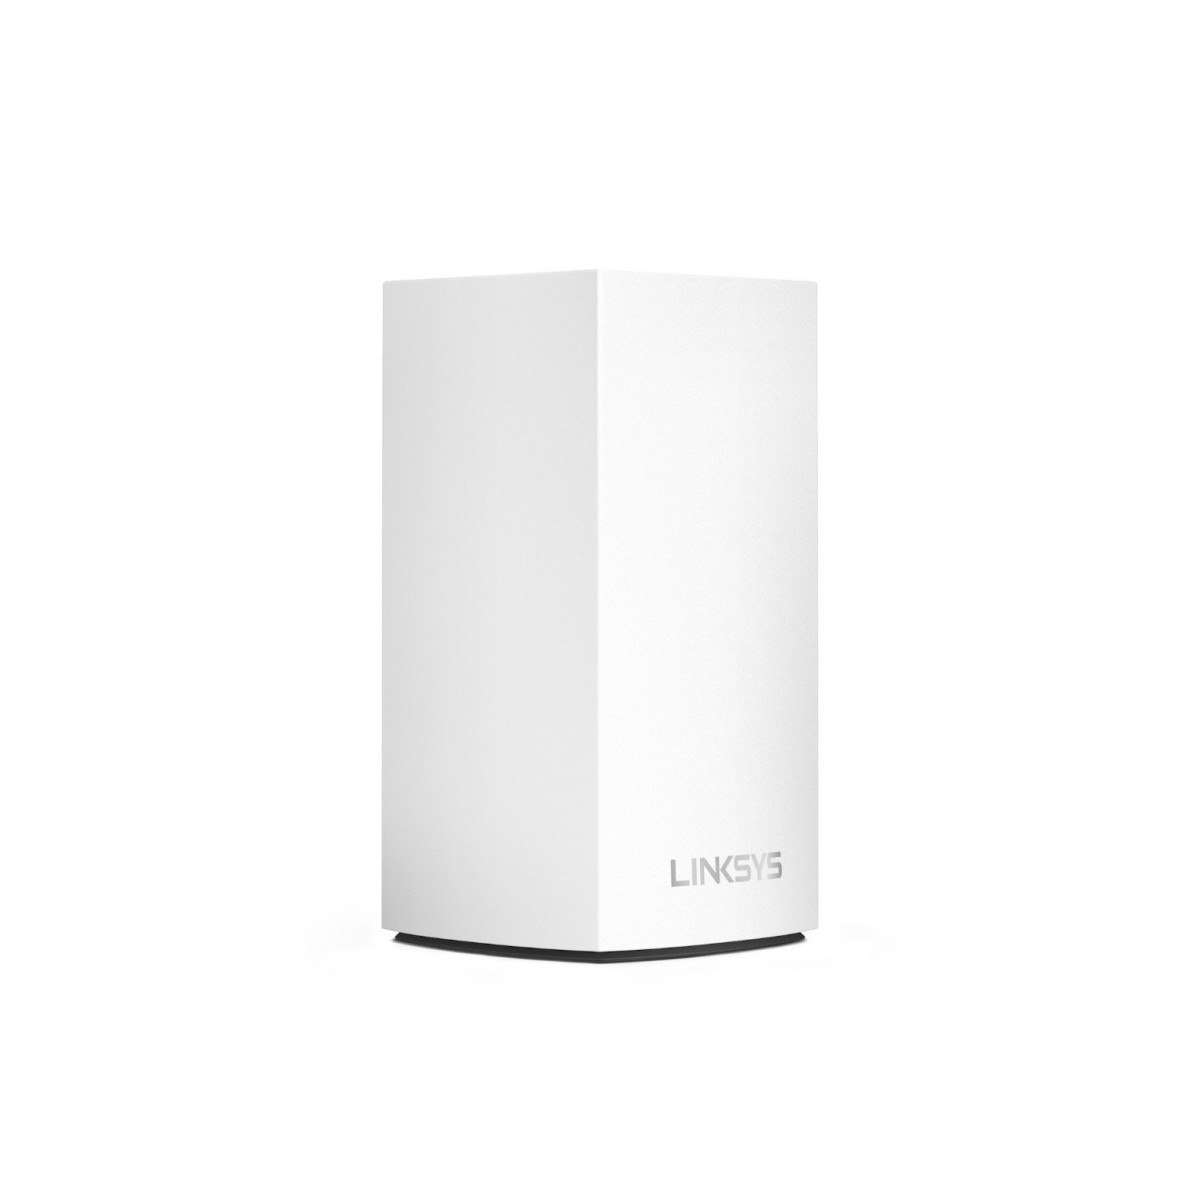 Linksys Velop - White - Router - WLAN - Amount of ports: - Bluetooth 4.0